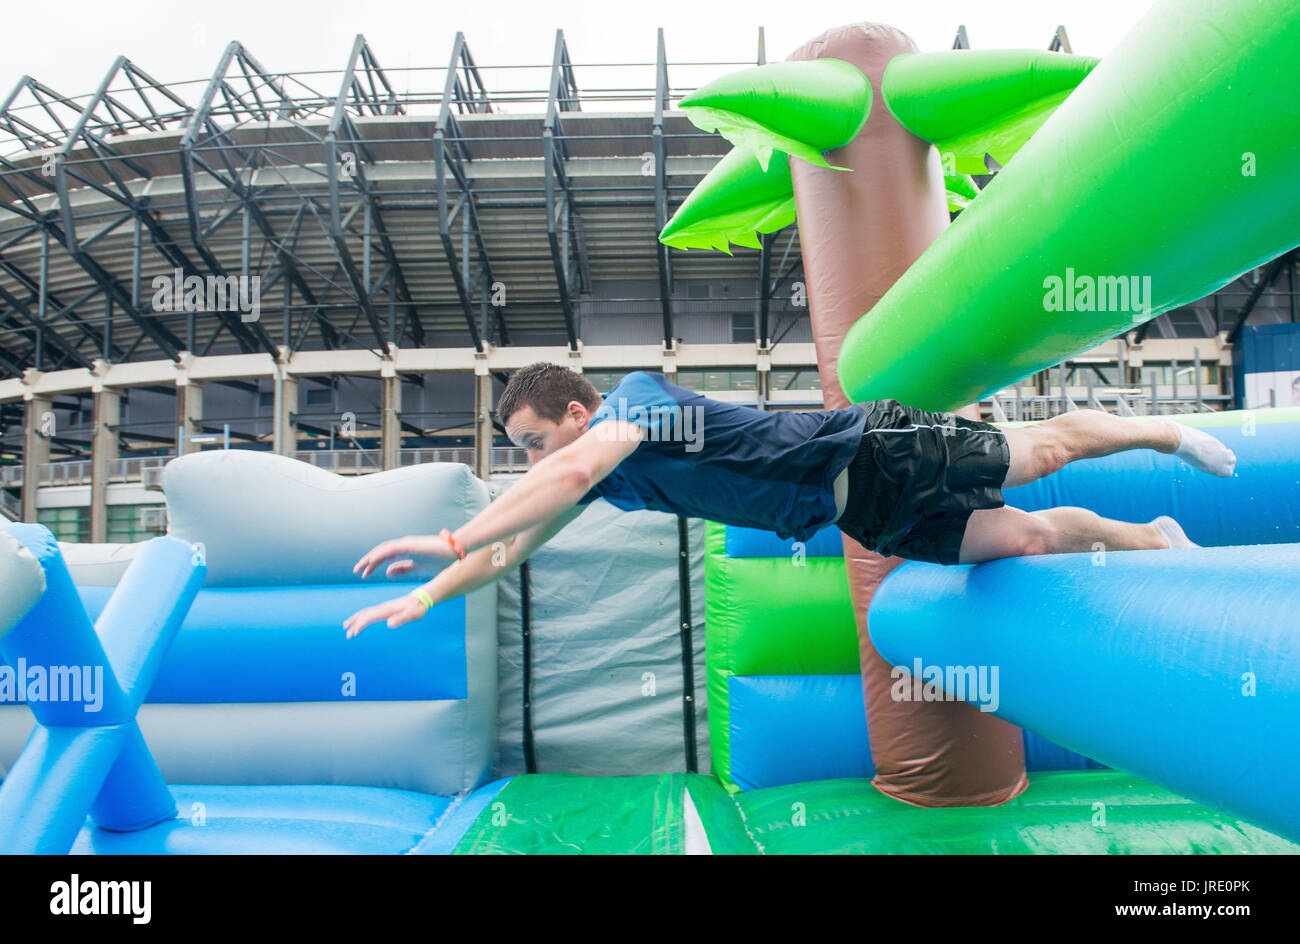 Labyrinth, world's largest inflatable obstacle course, Murrayfield John MacKay Stock Photo